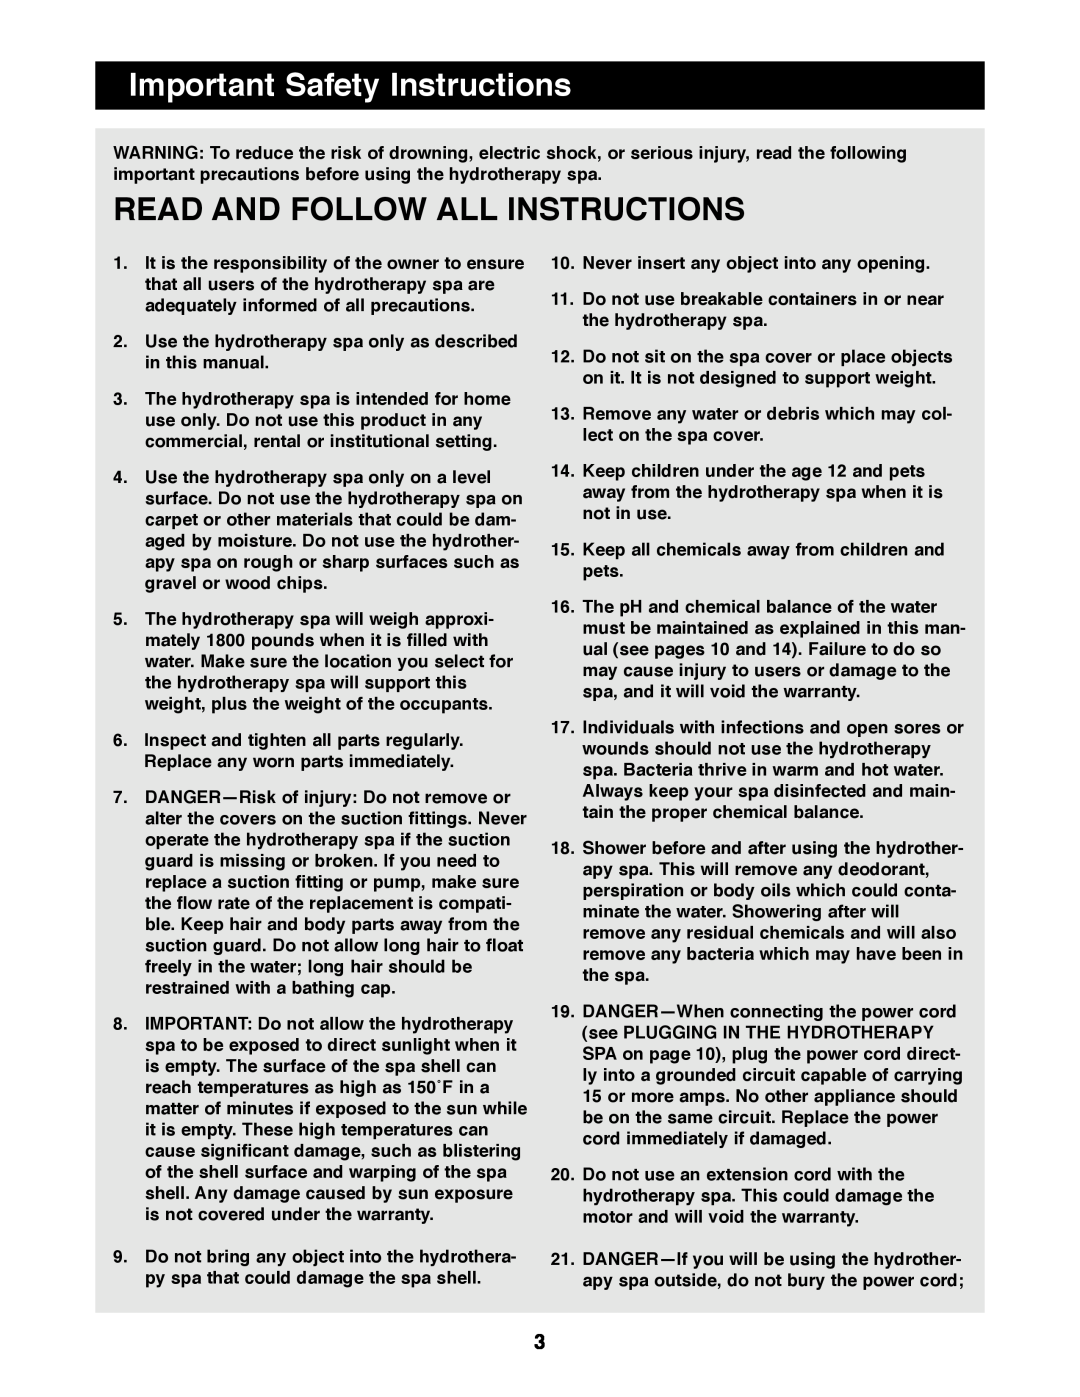 Weslo WLHS43081 manual Important Safety Instructions, Read And Follow All Instructions 